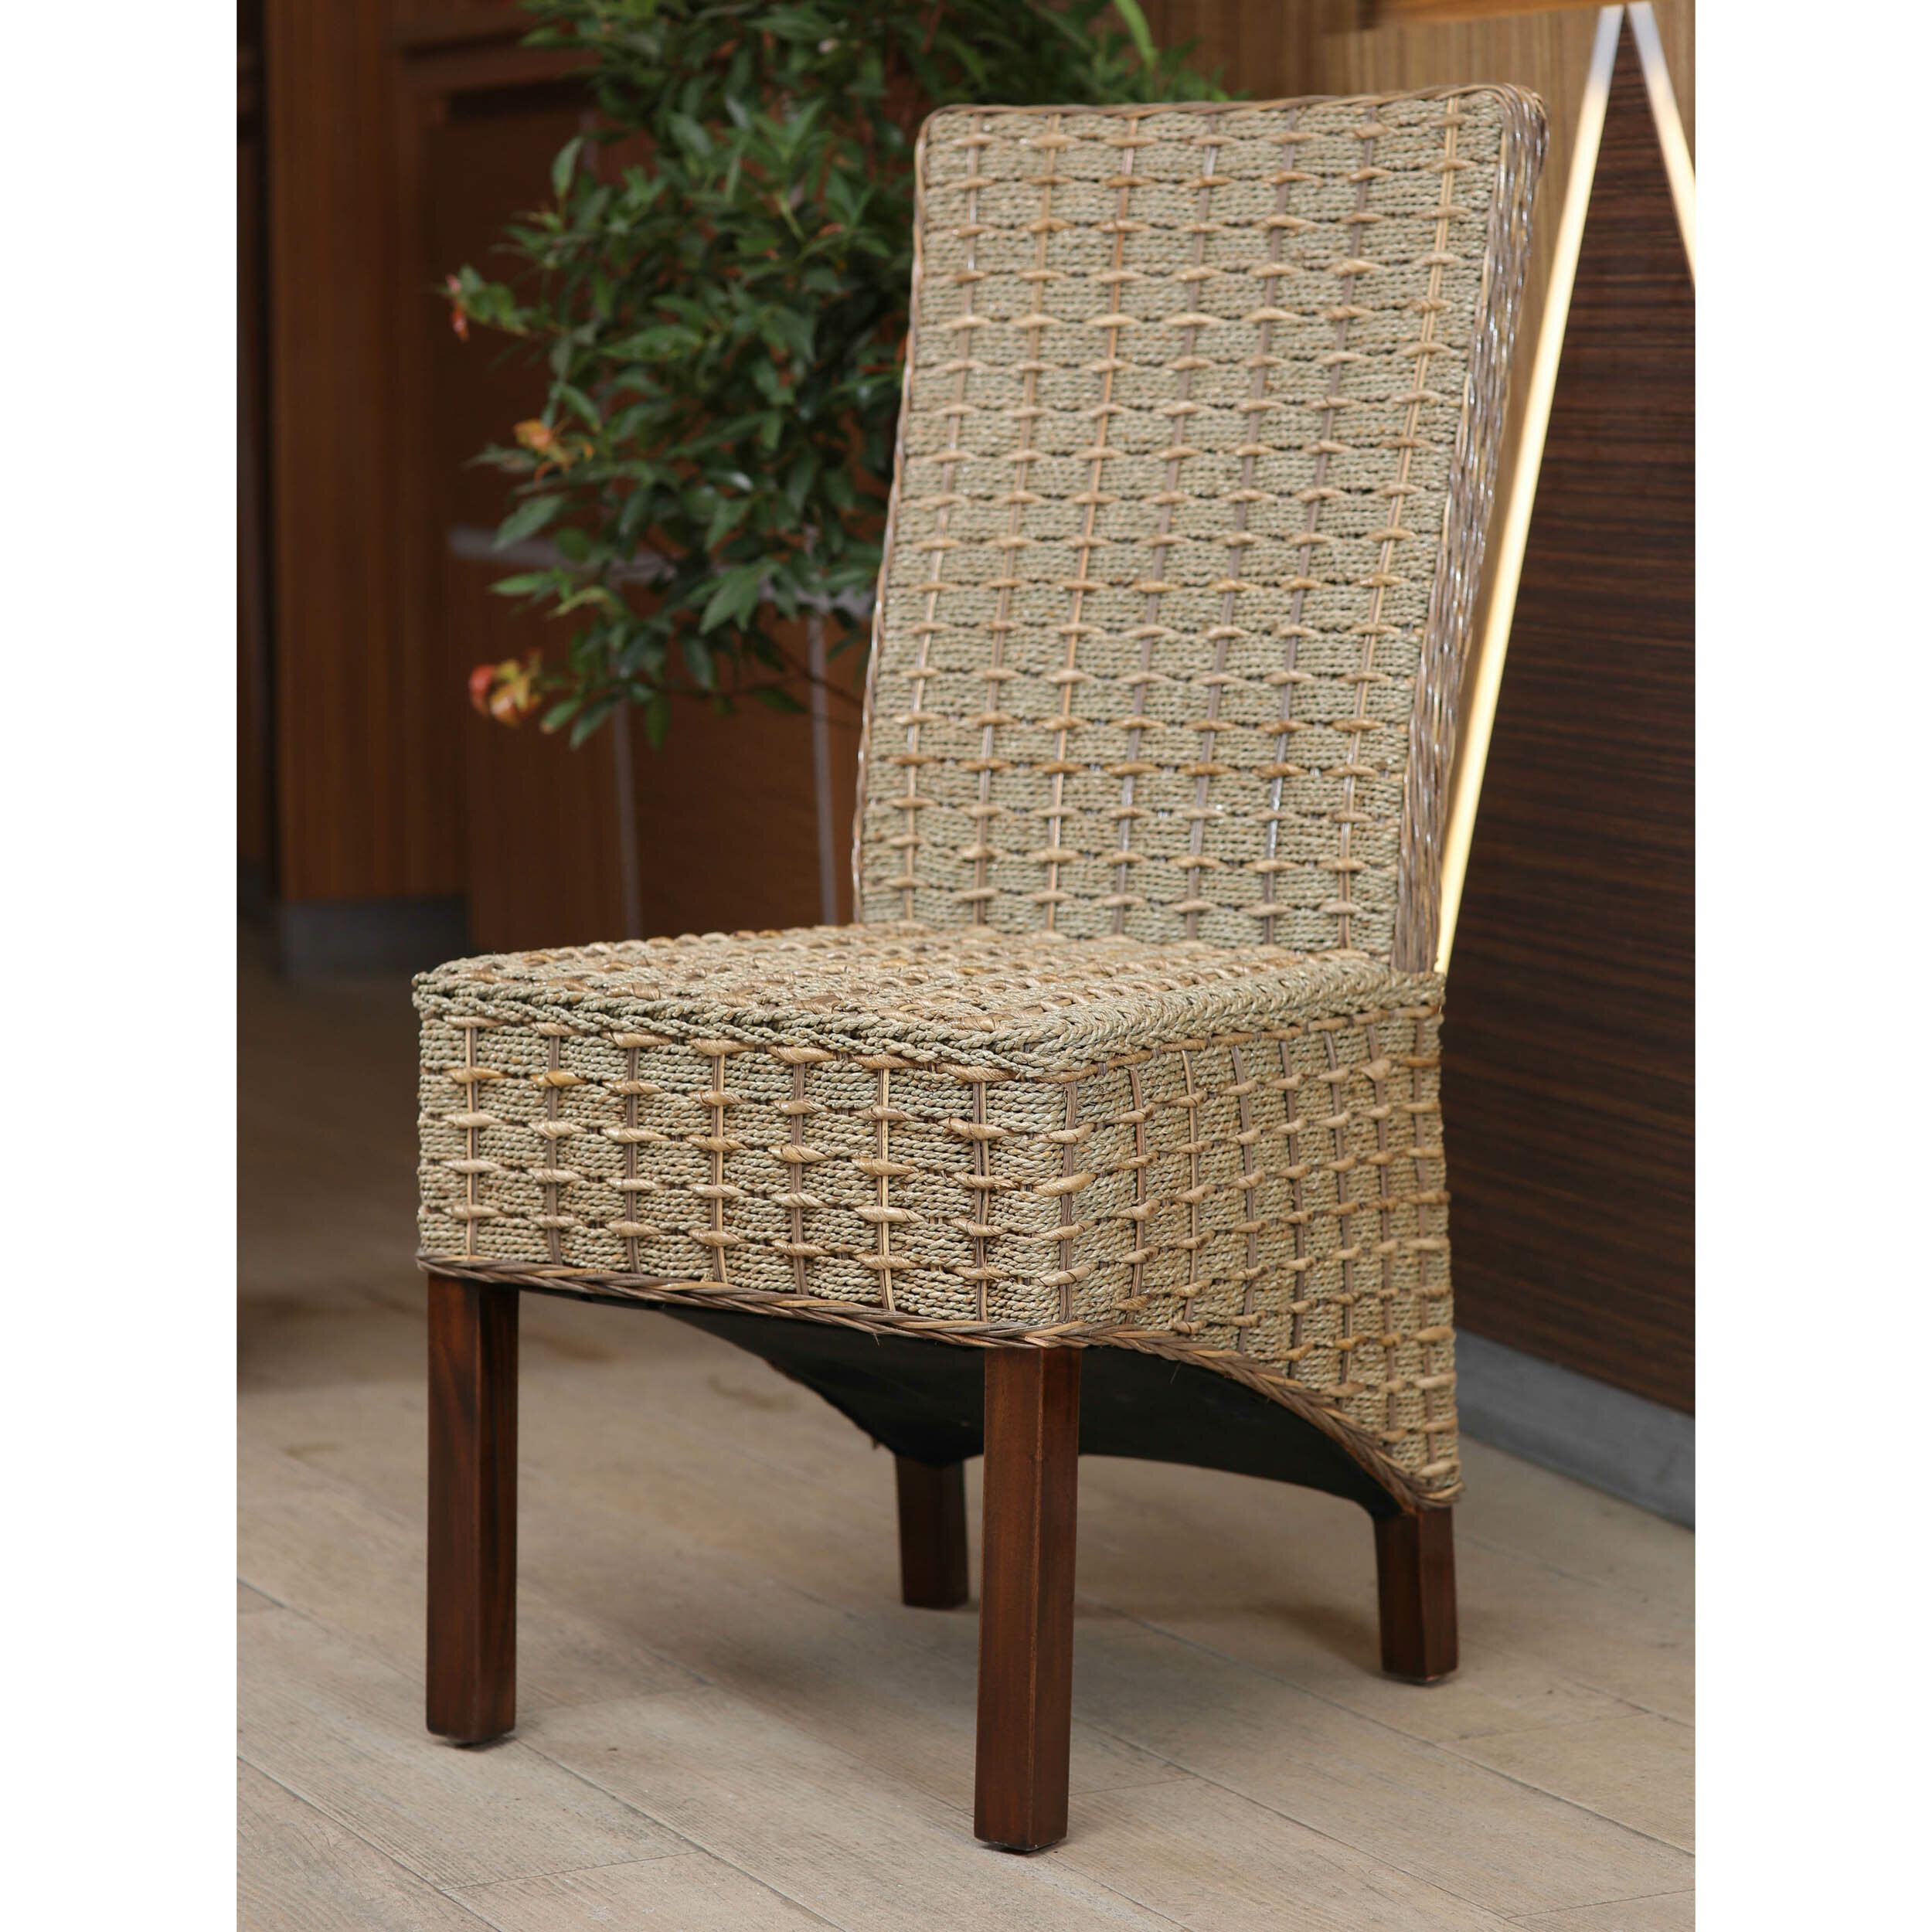 Brown Best Choice Products Set of 2 Elegant Hand Woven Seagrass Dining Side Chairs w//Sturdy Wooden Legs and High Backrest for Home Kitchen